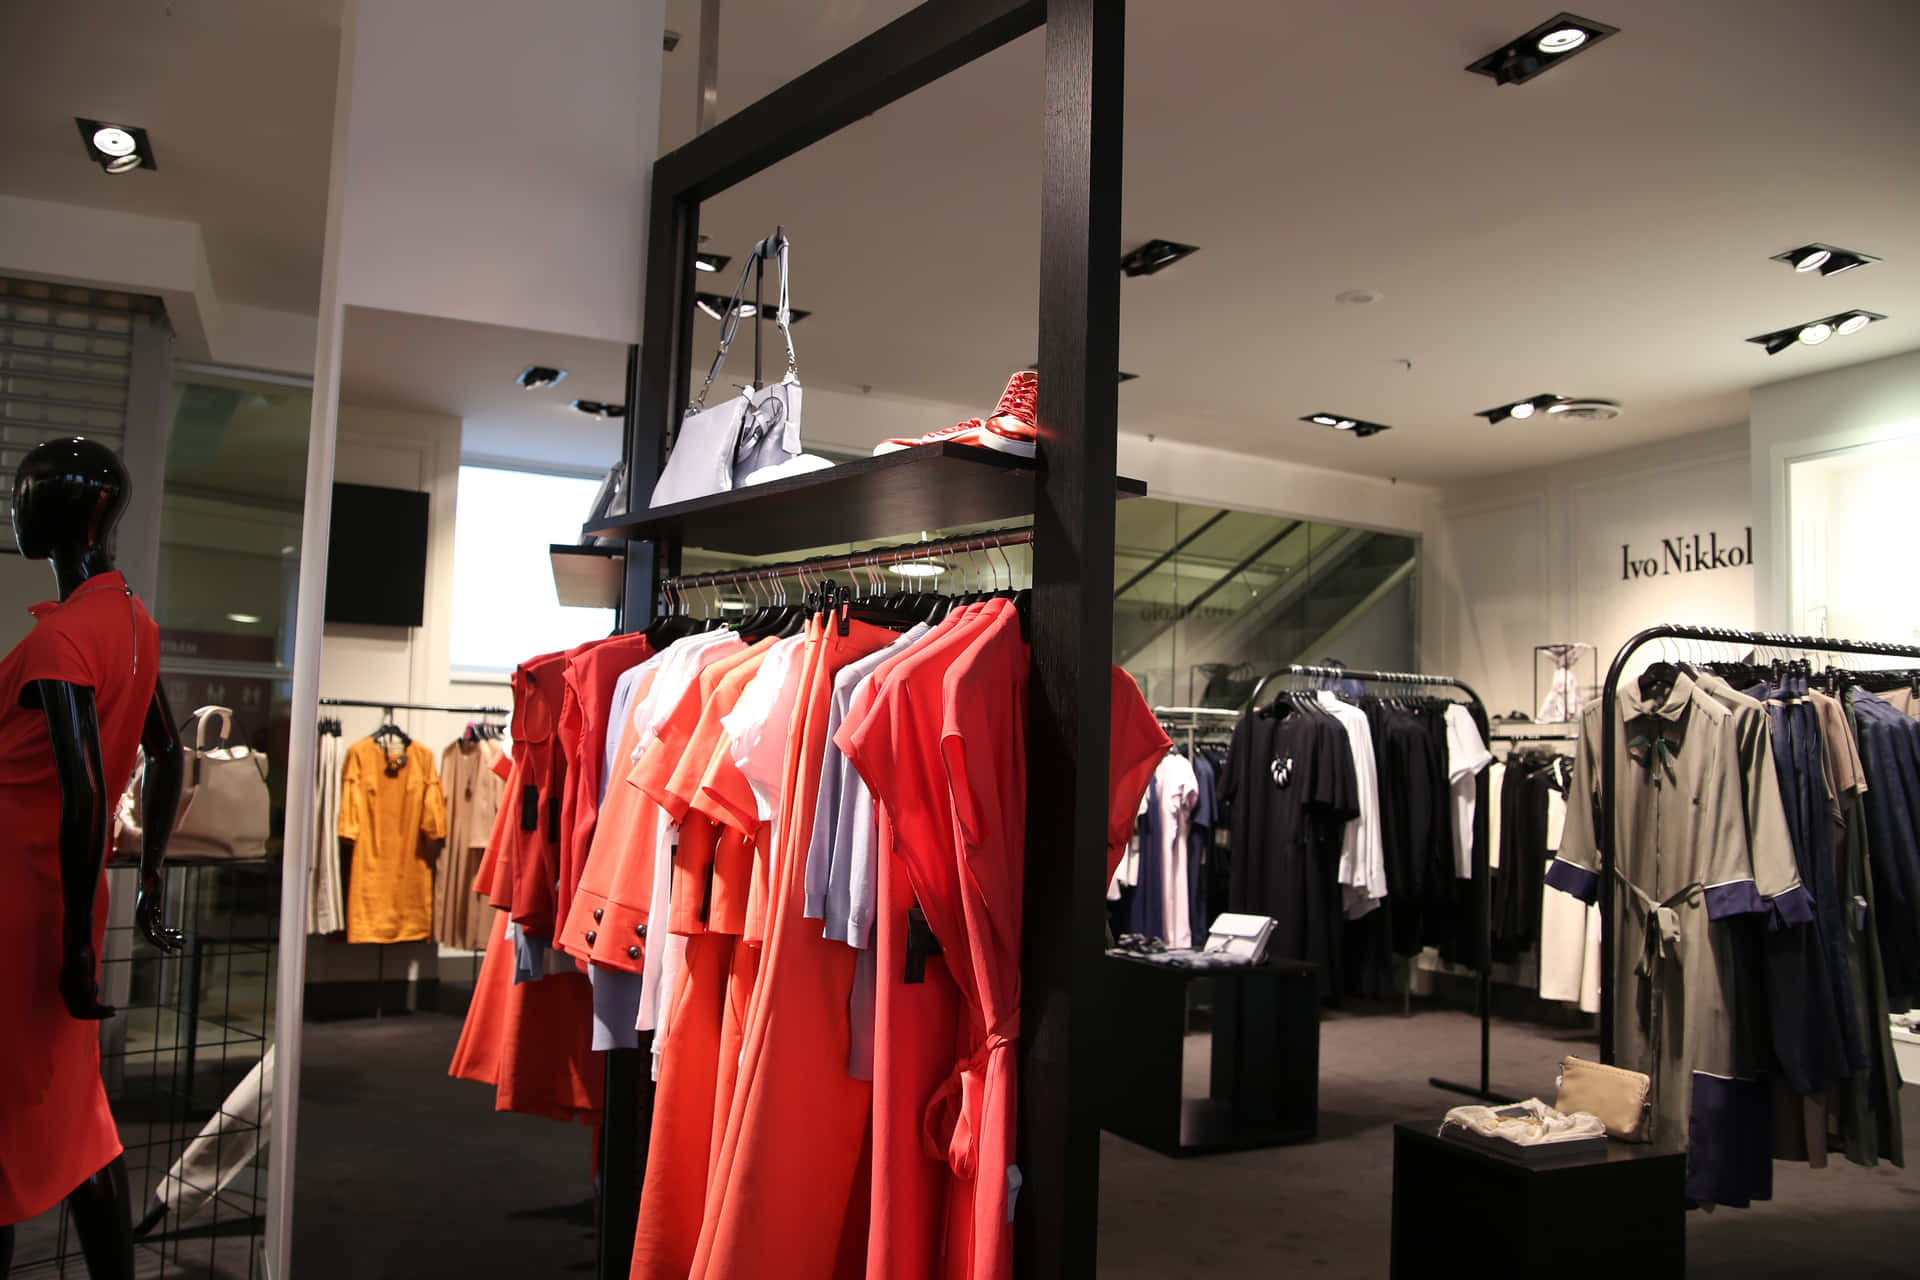 A Store With Clothes On Display